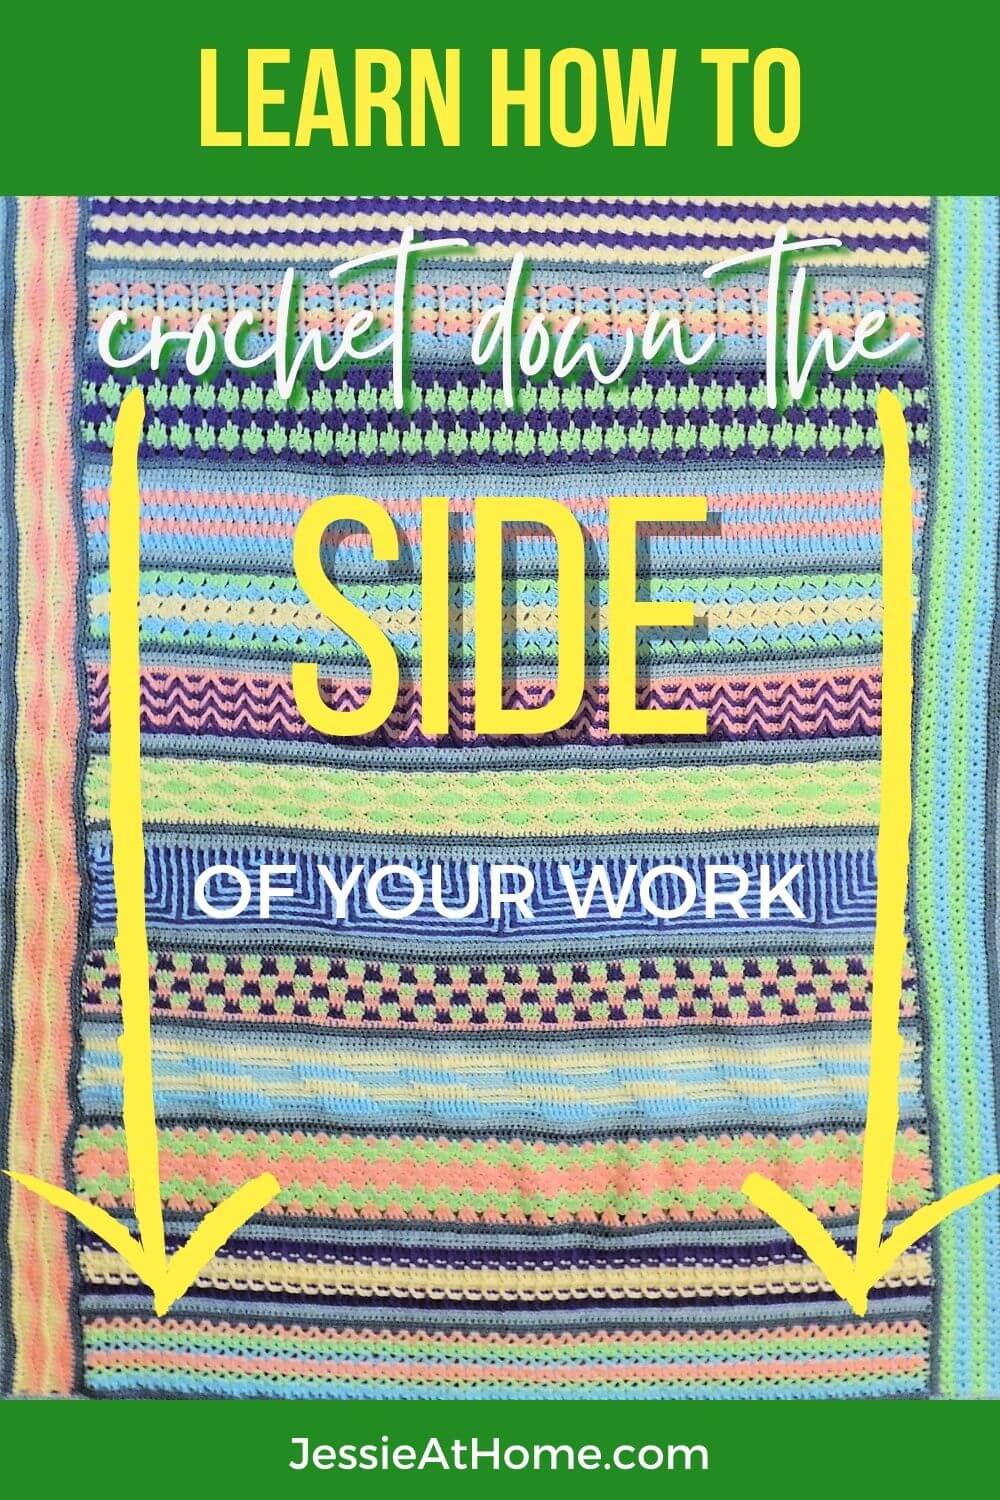 How To Crochet Down the Side of Your Work